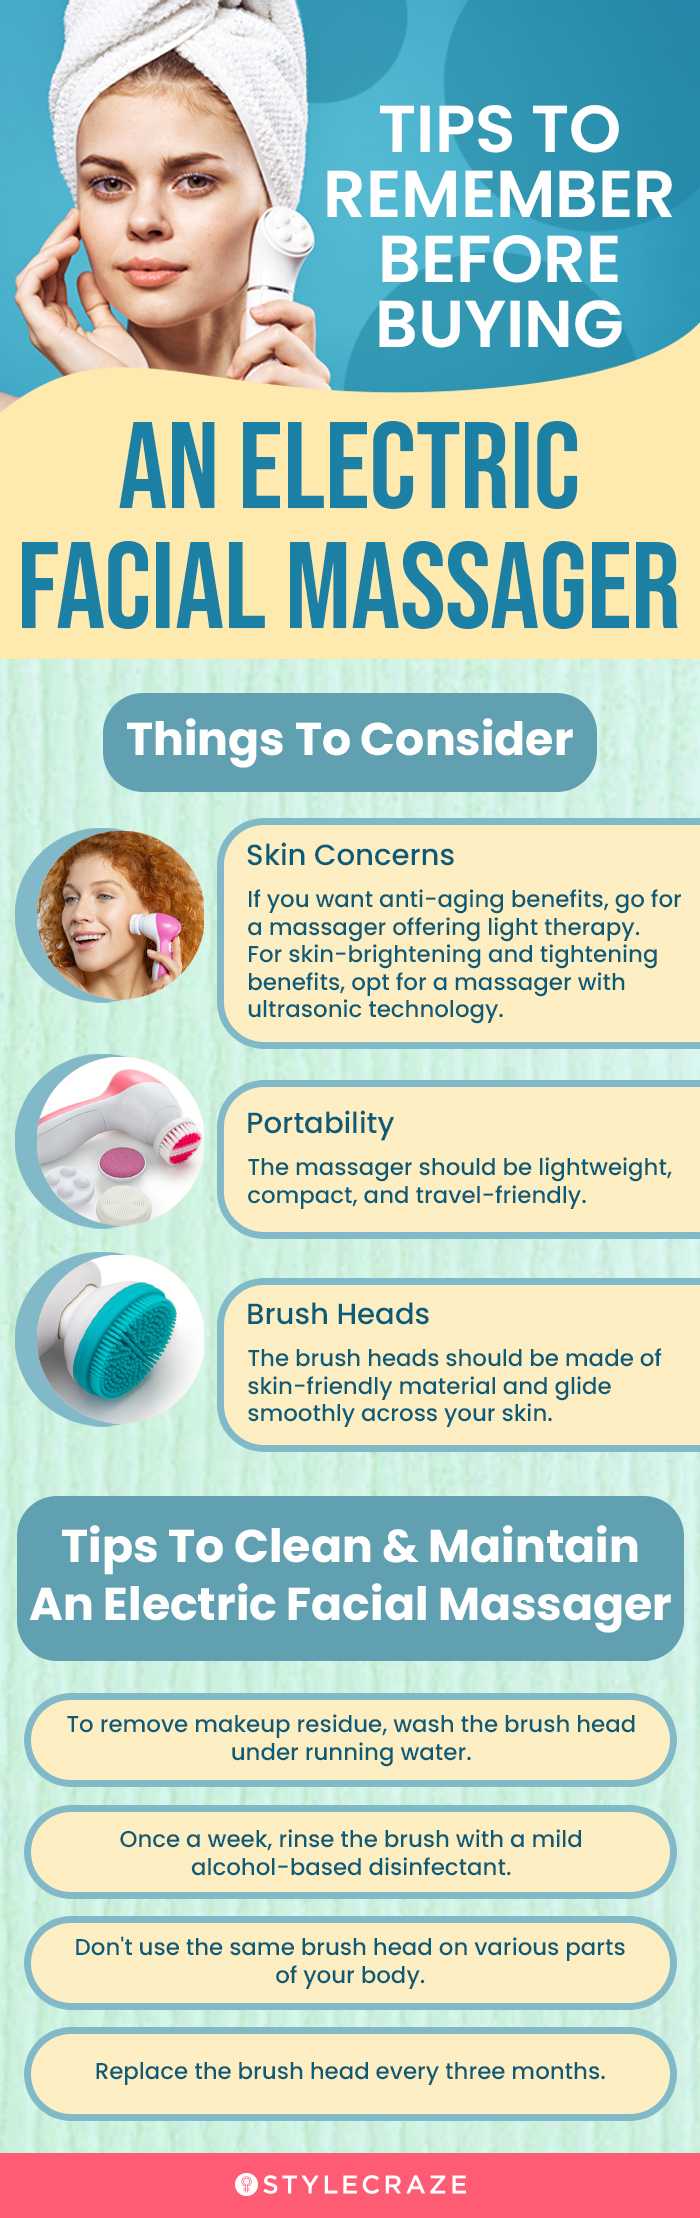 Tips To Remember Before Buying An Electric Facial Massager [infographic]